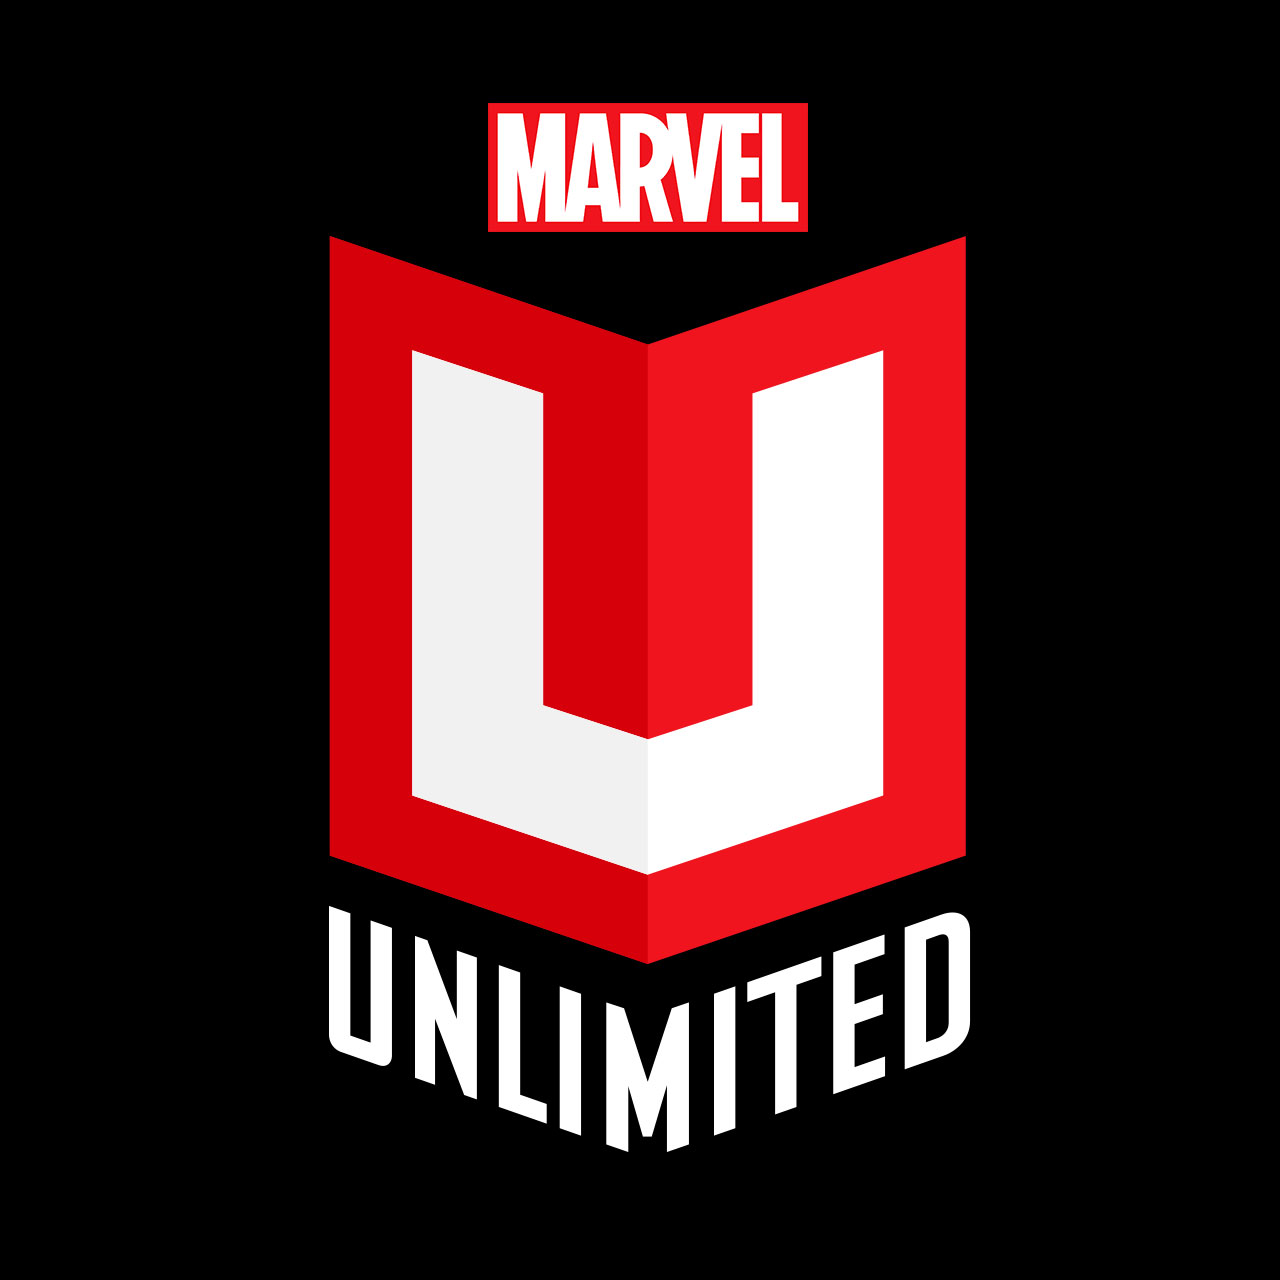 AMERICAN WARGAMERS ASSOCIATION: Marvel Unlimited Comic Book App Review